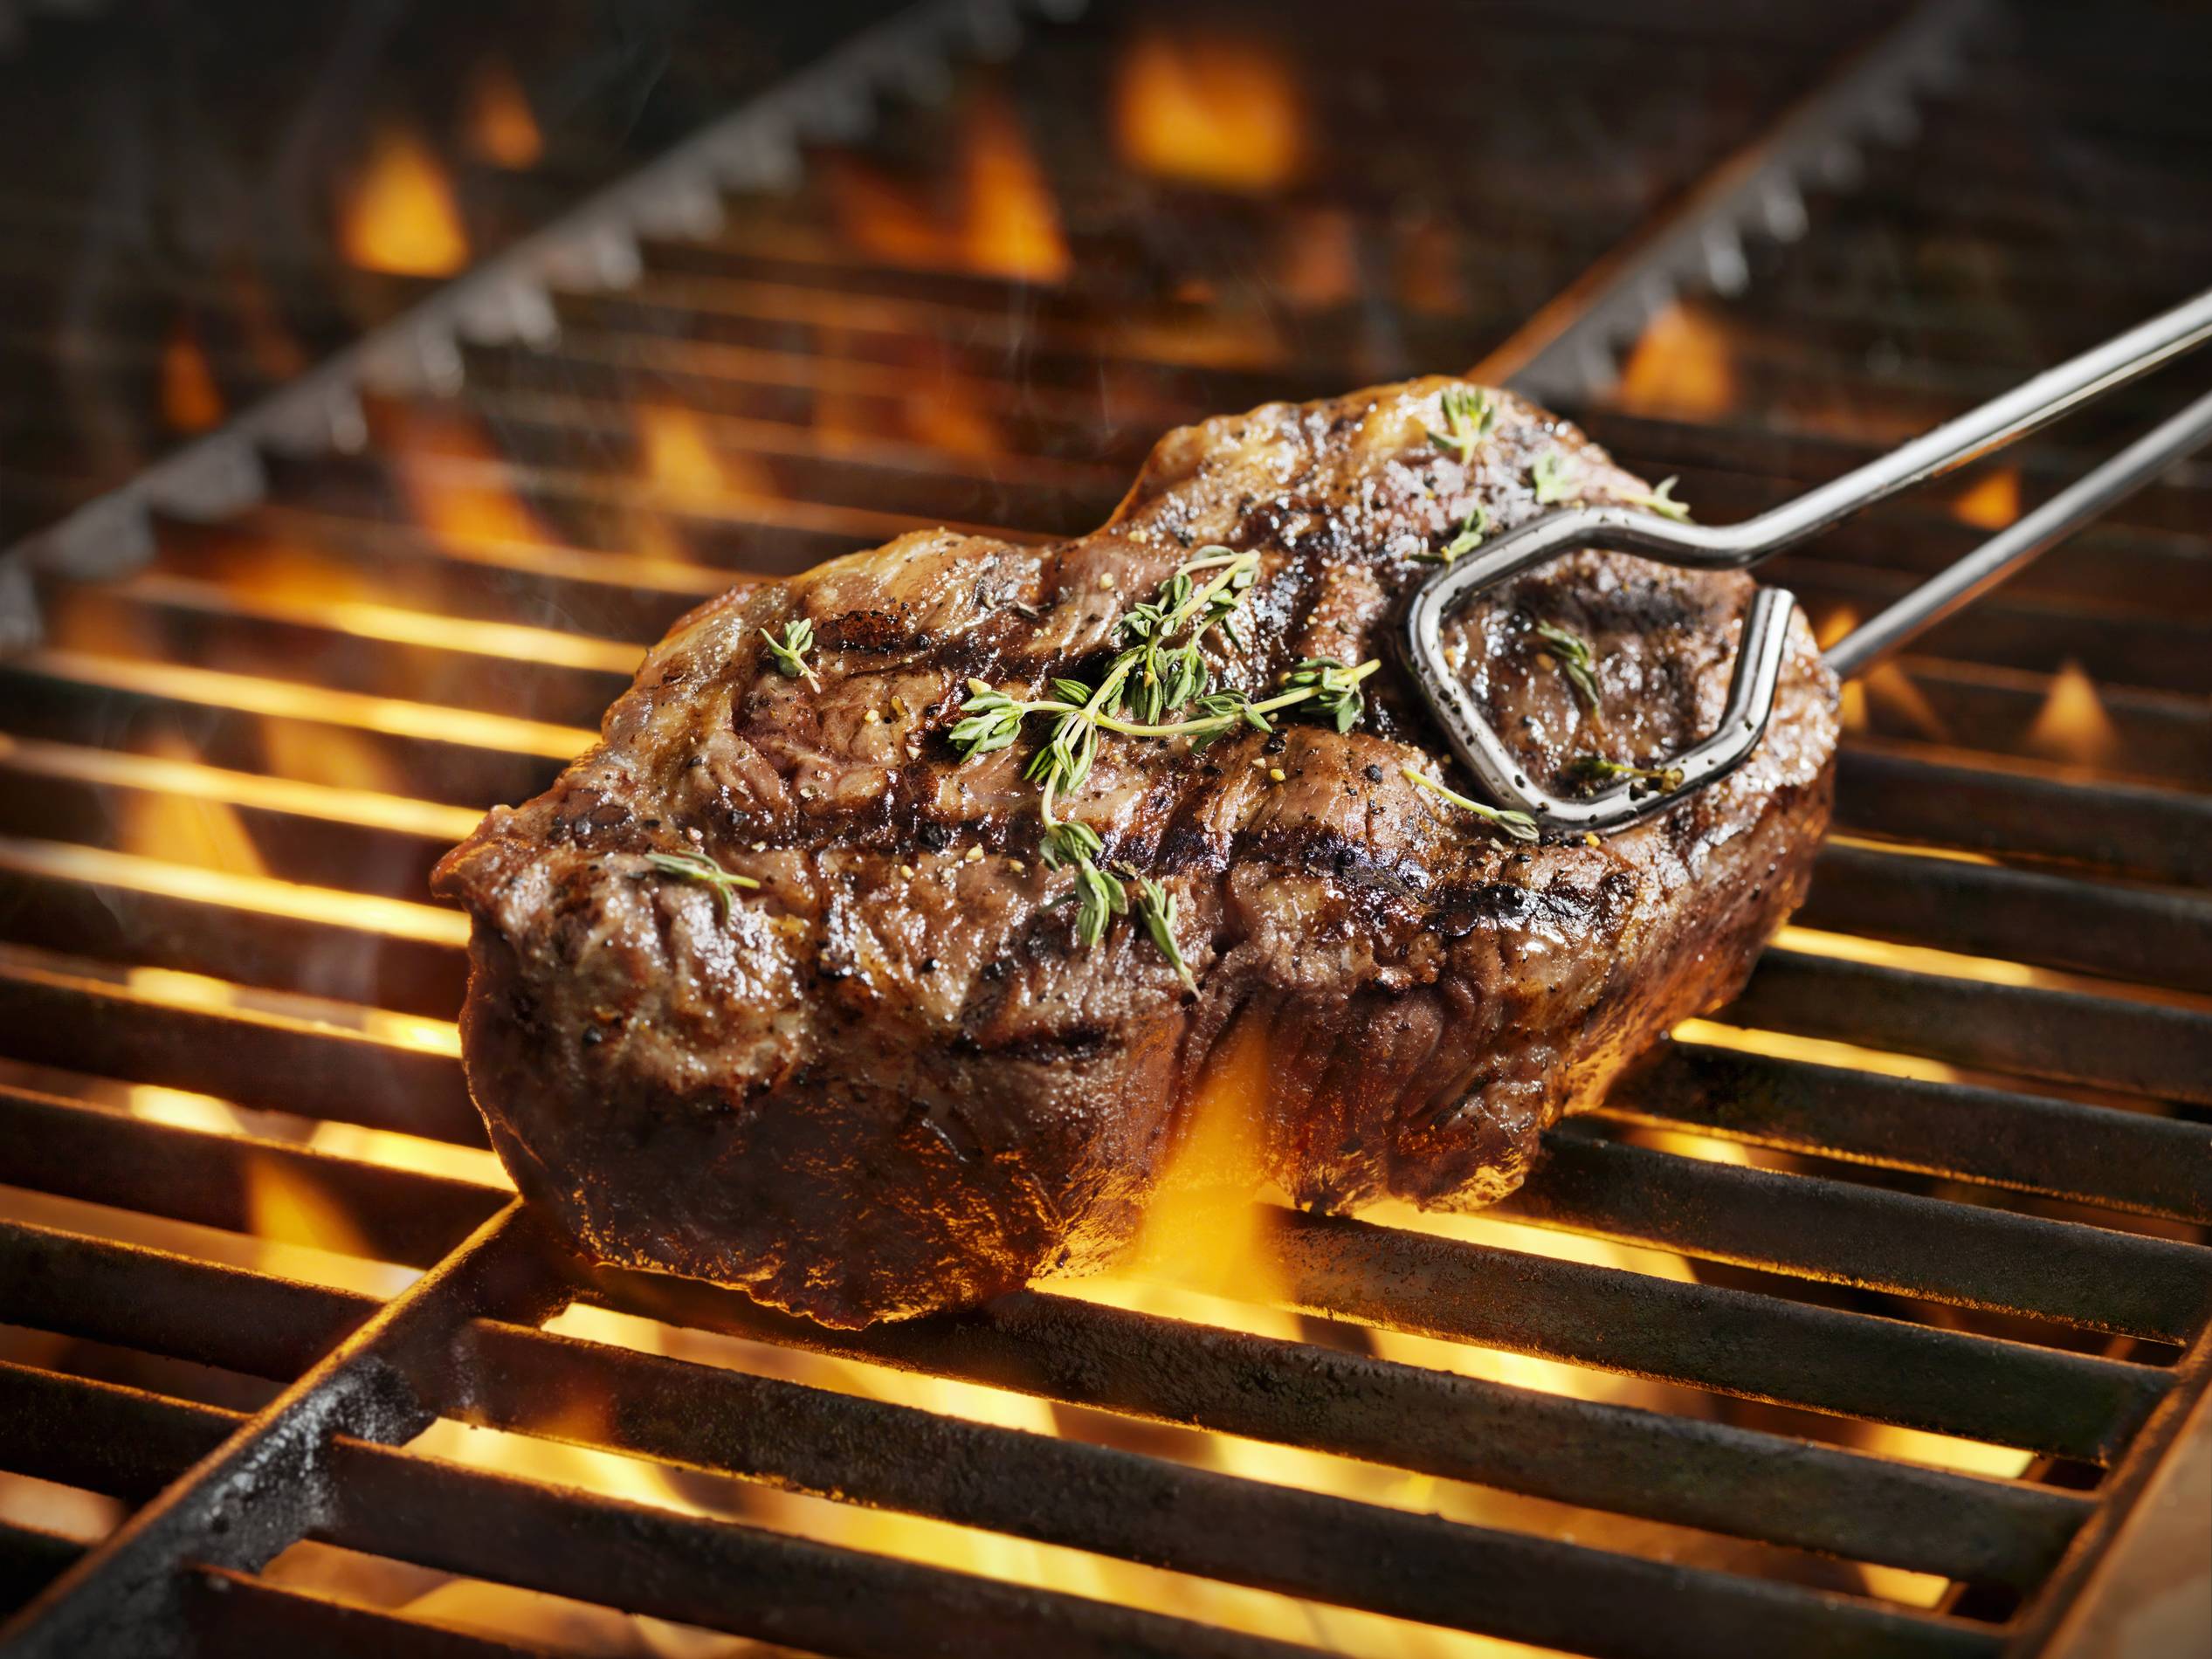 chi-steak-credit-lauri-patterson-getty-images.jpg